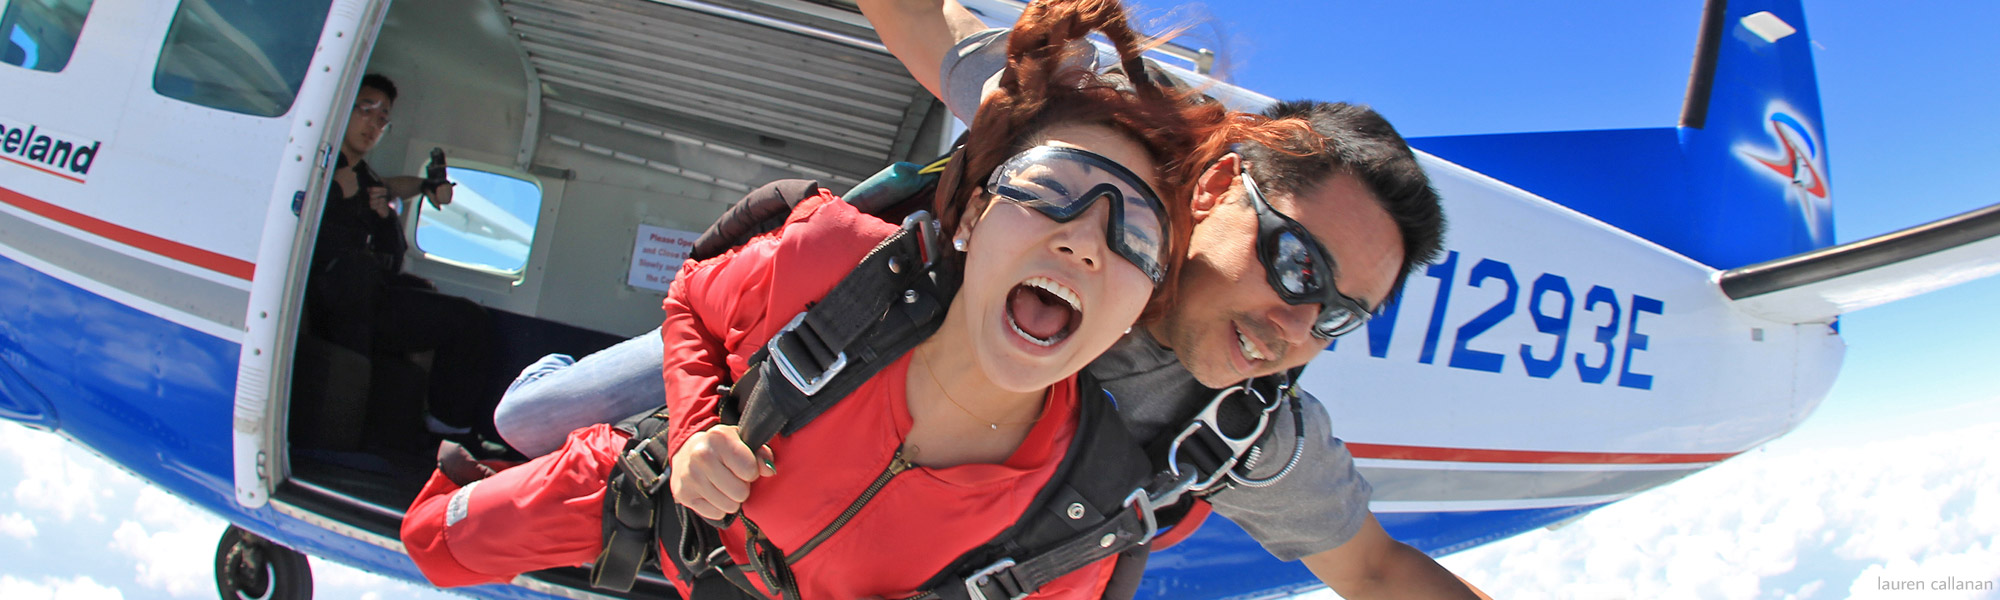 Your First Jump Tandem Skydiving! Skydive Spaceland Houston